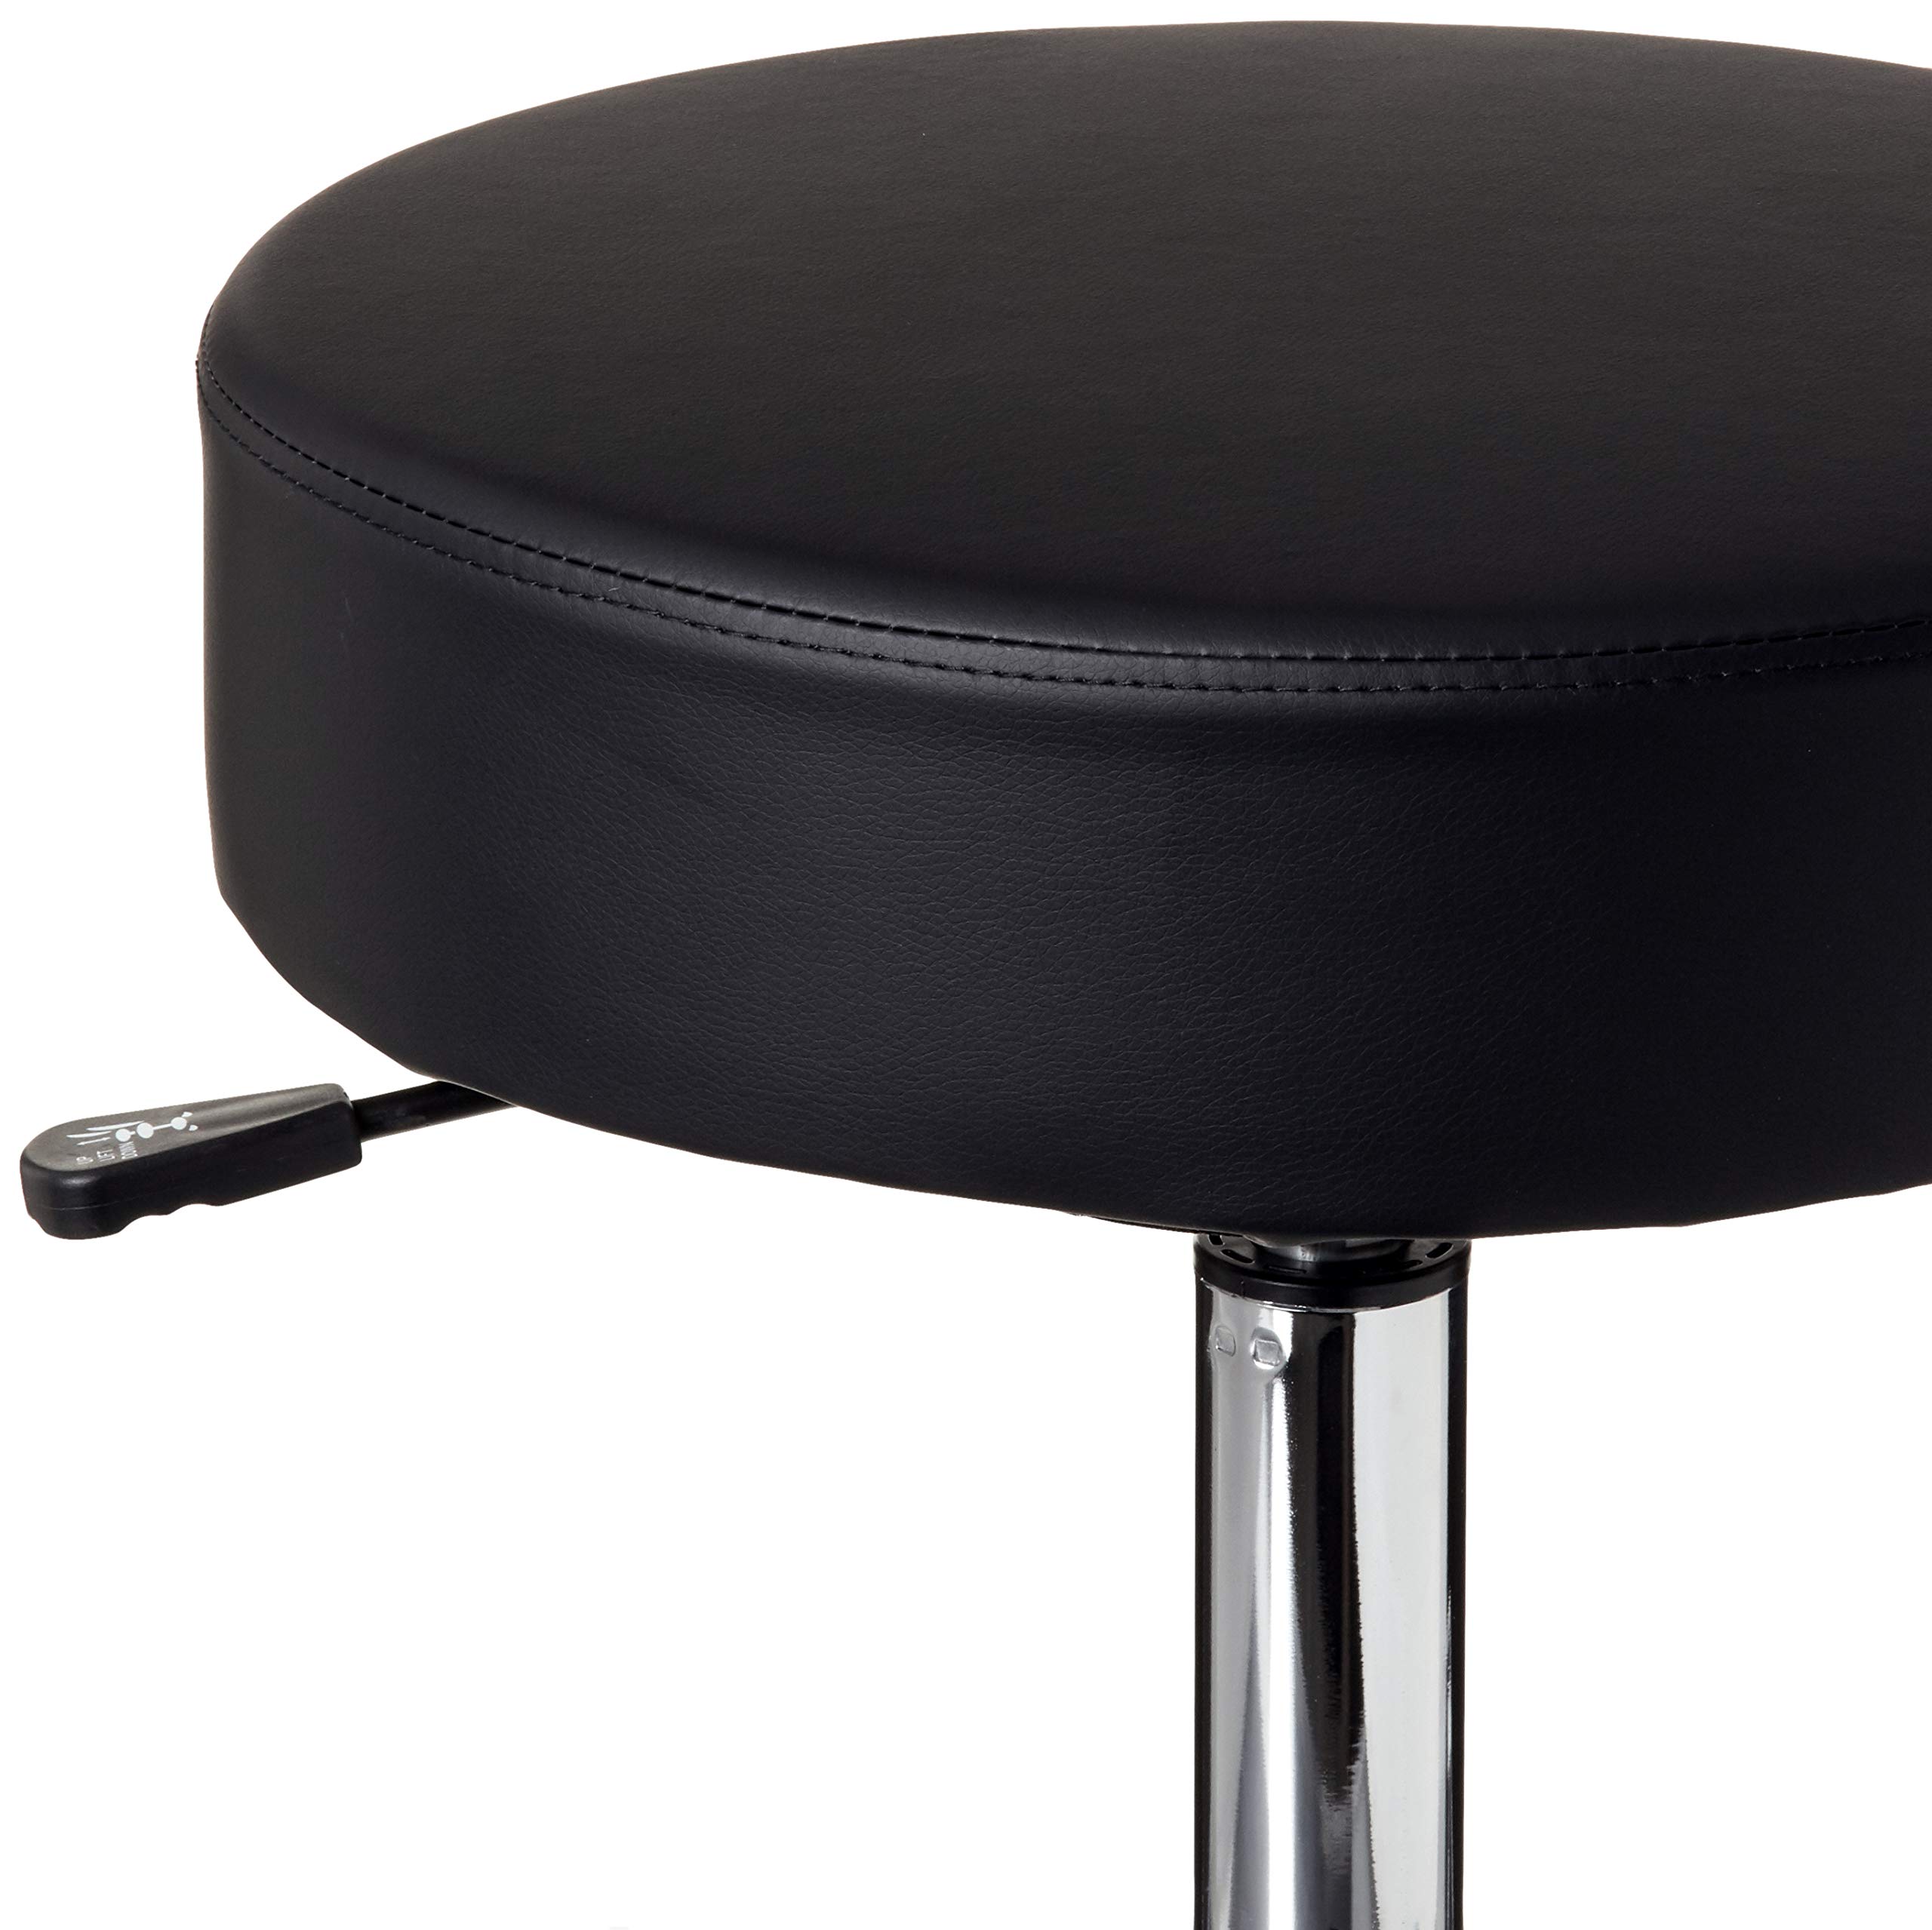 Boss Office Products Be Well Medical Spa Stool in Black